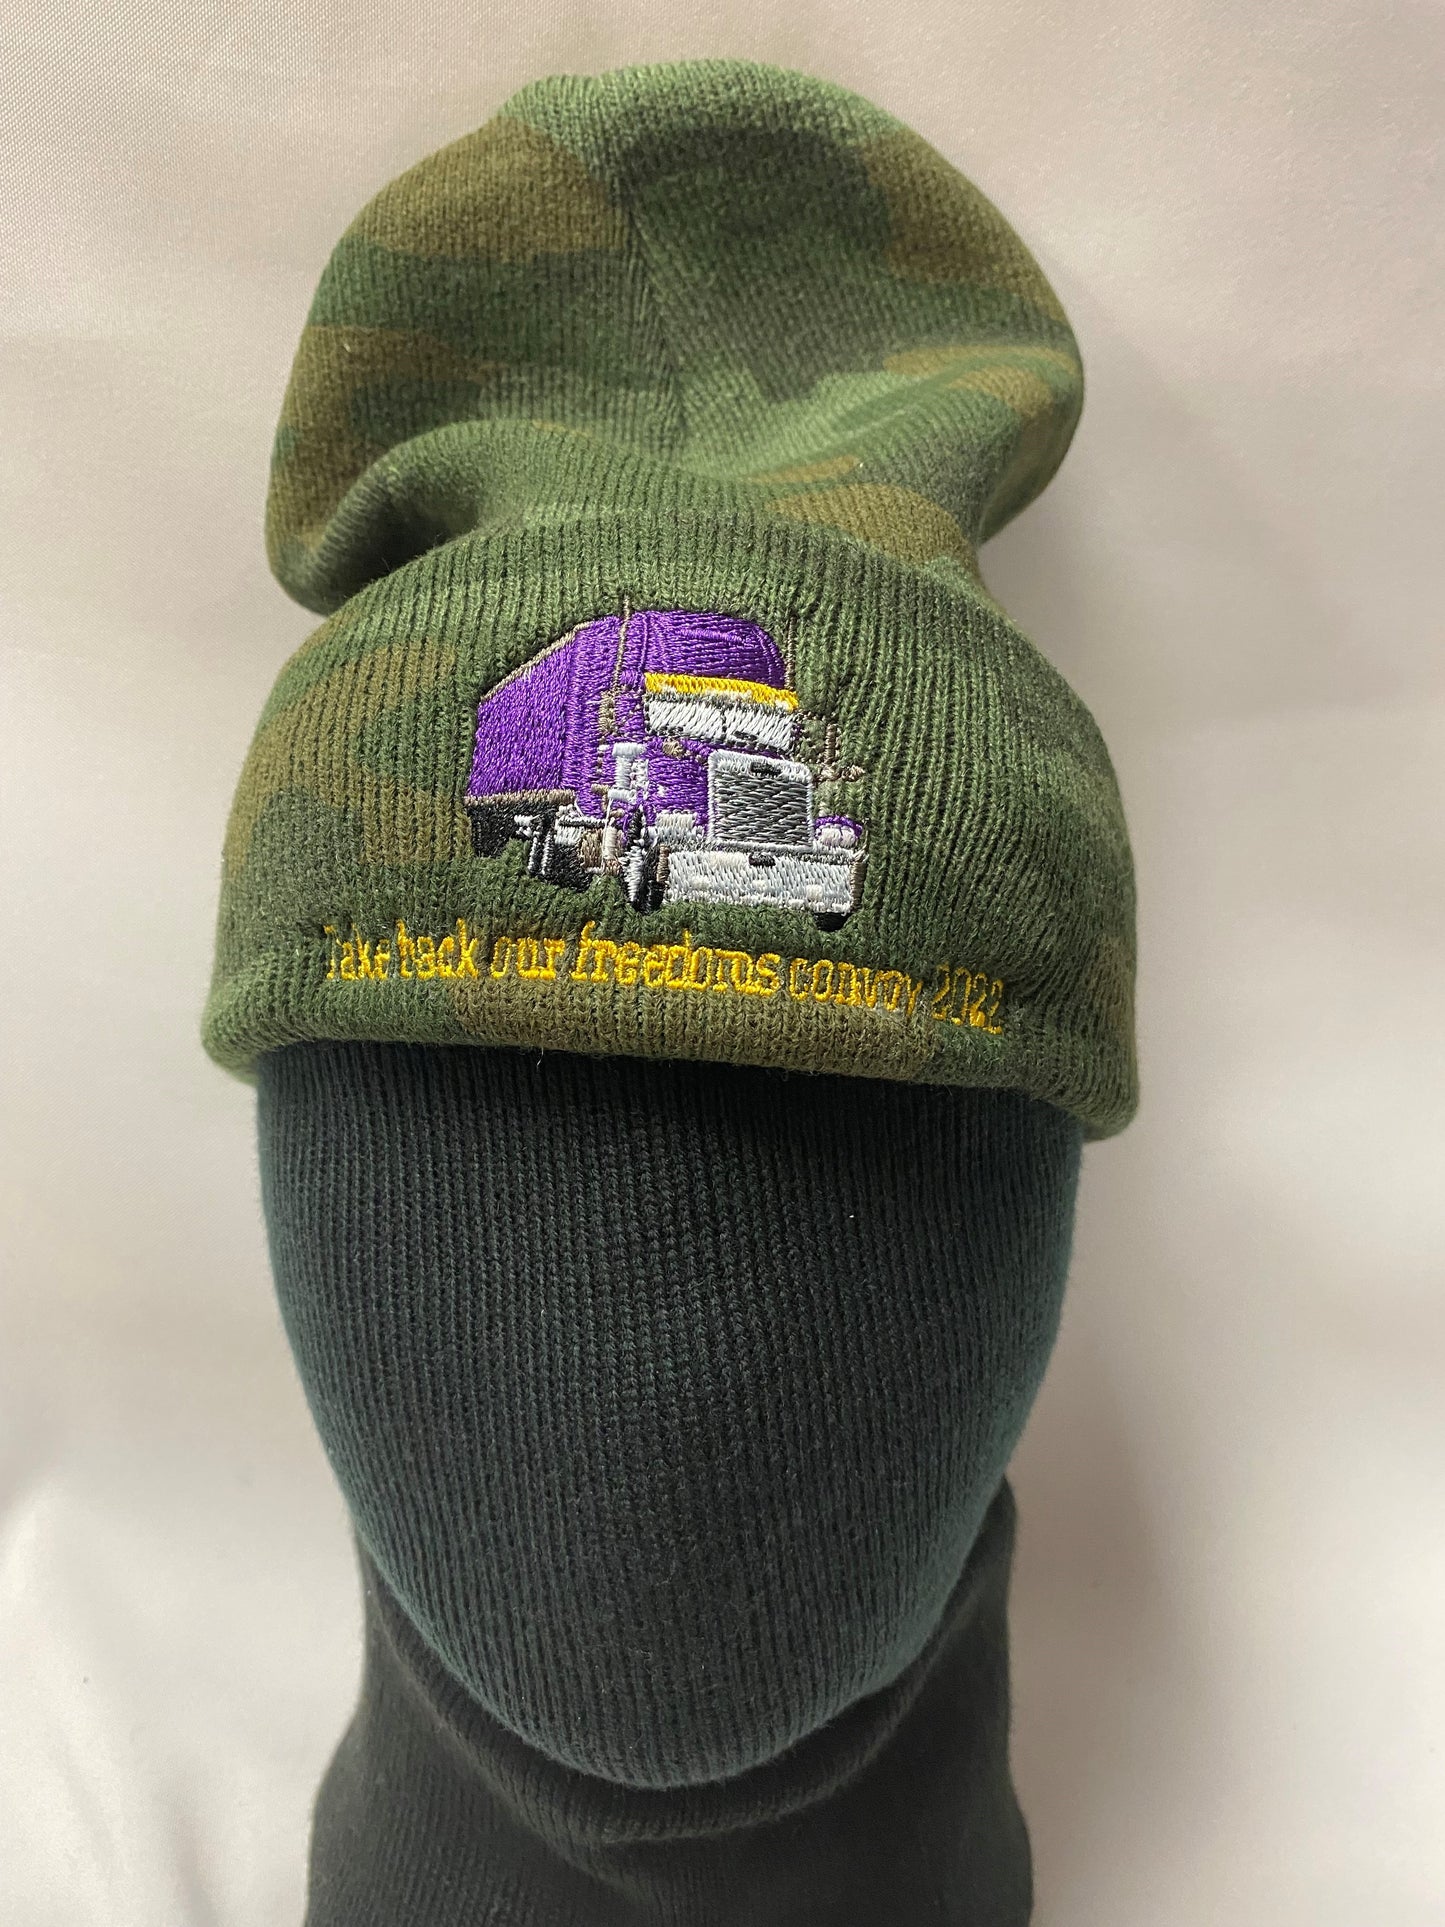 TRUCKER TOQUE camouflage: "Take back our freedoms convoy 2022"